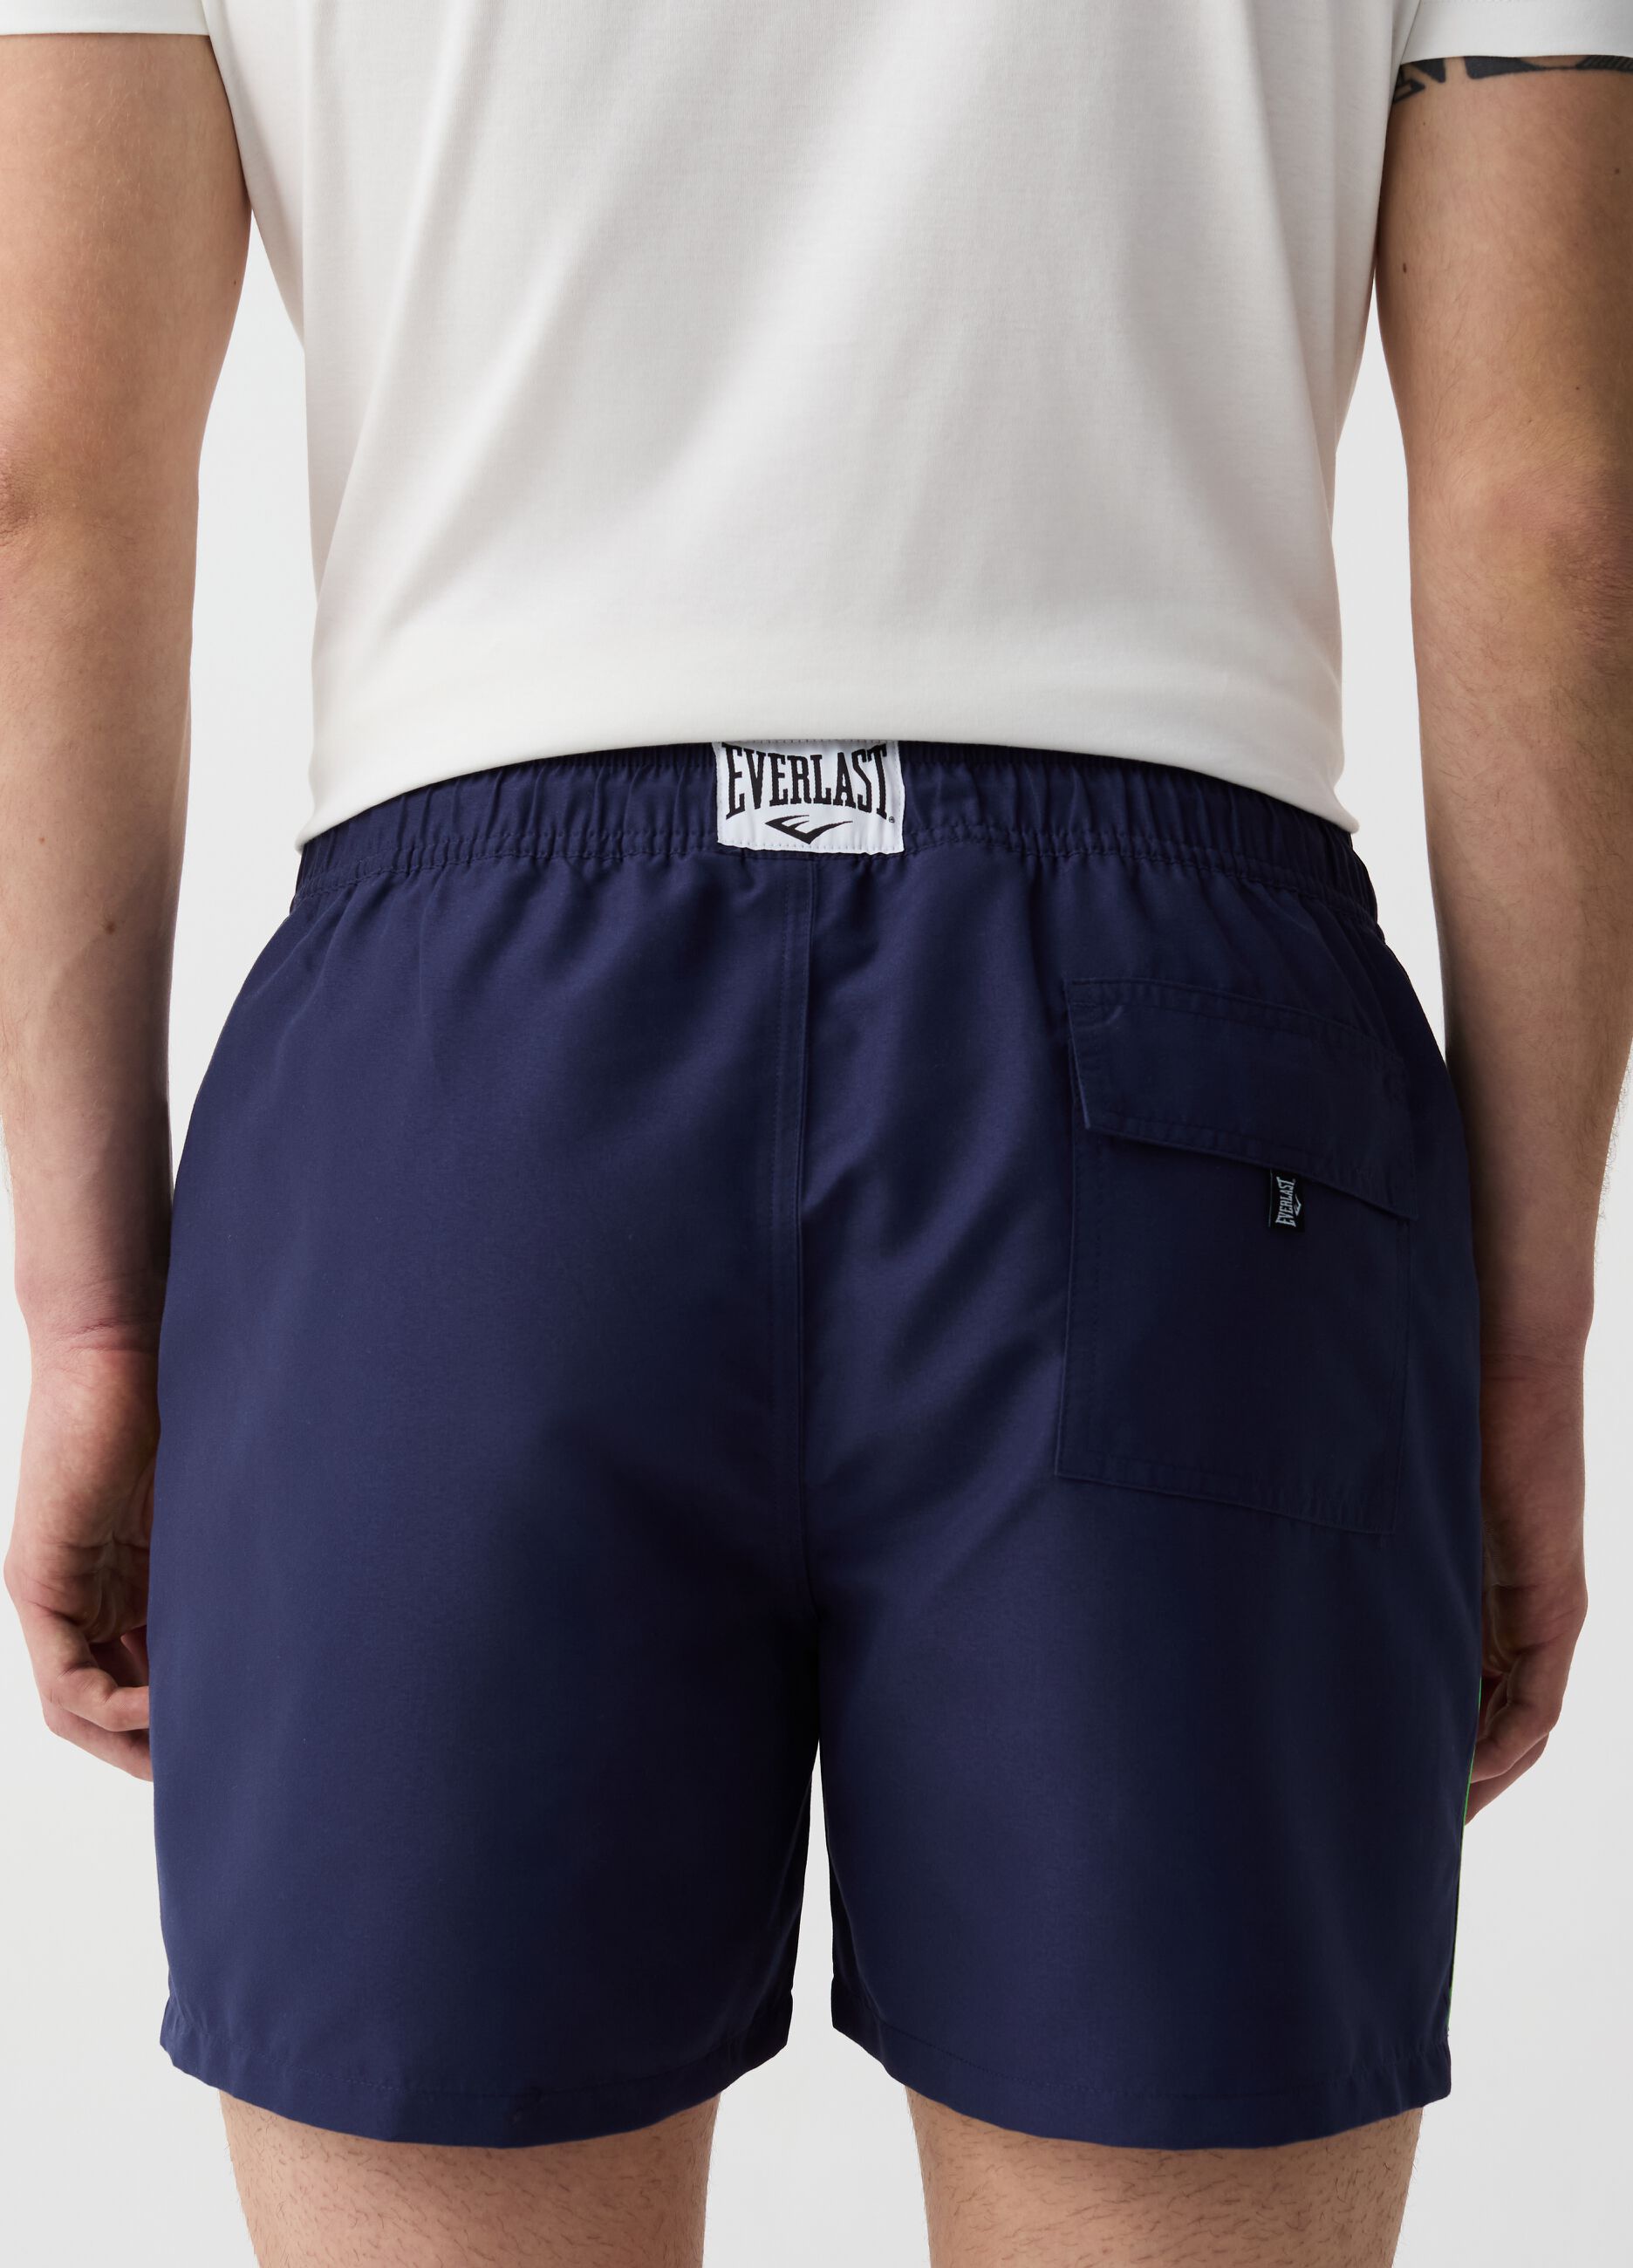 Swimming trunks with contrasting details